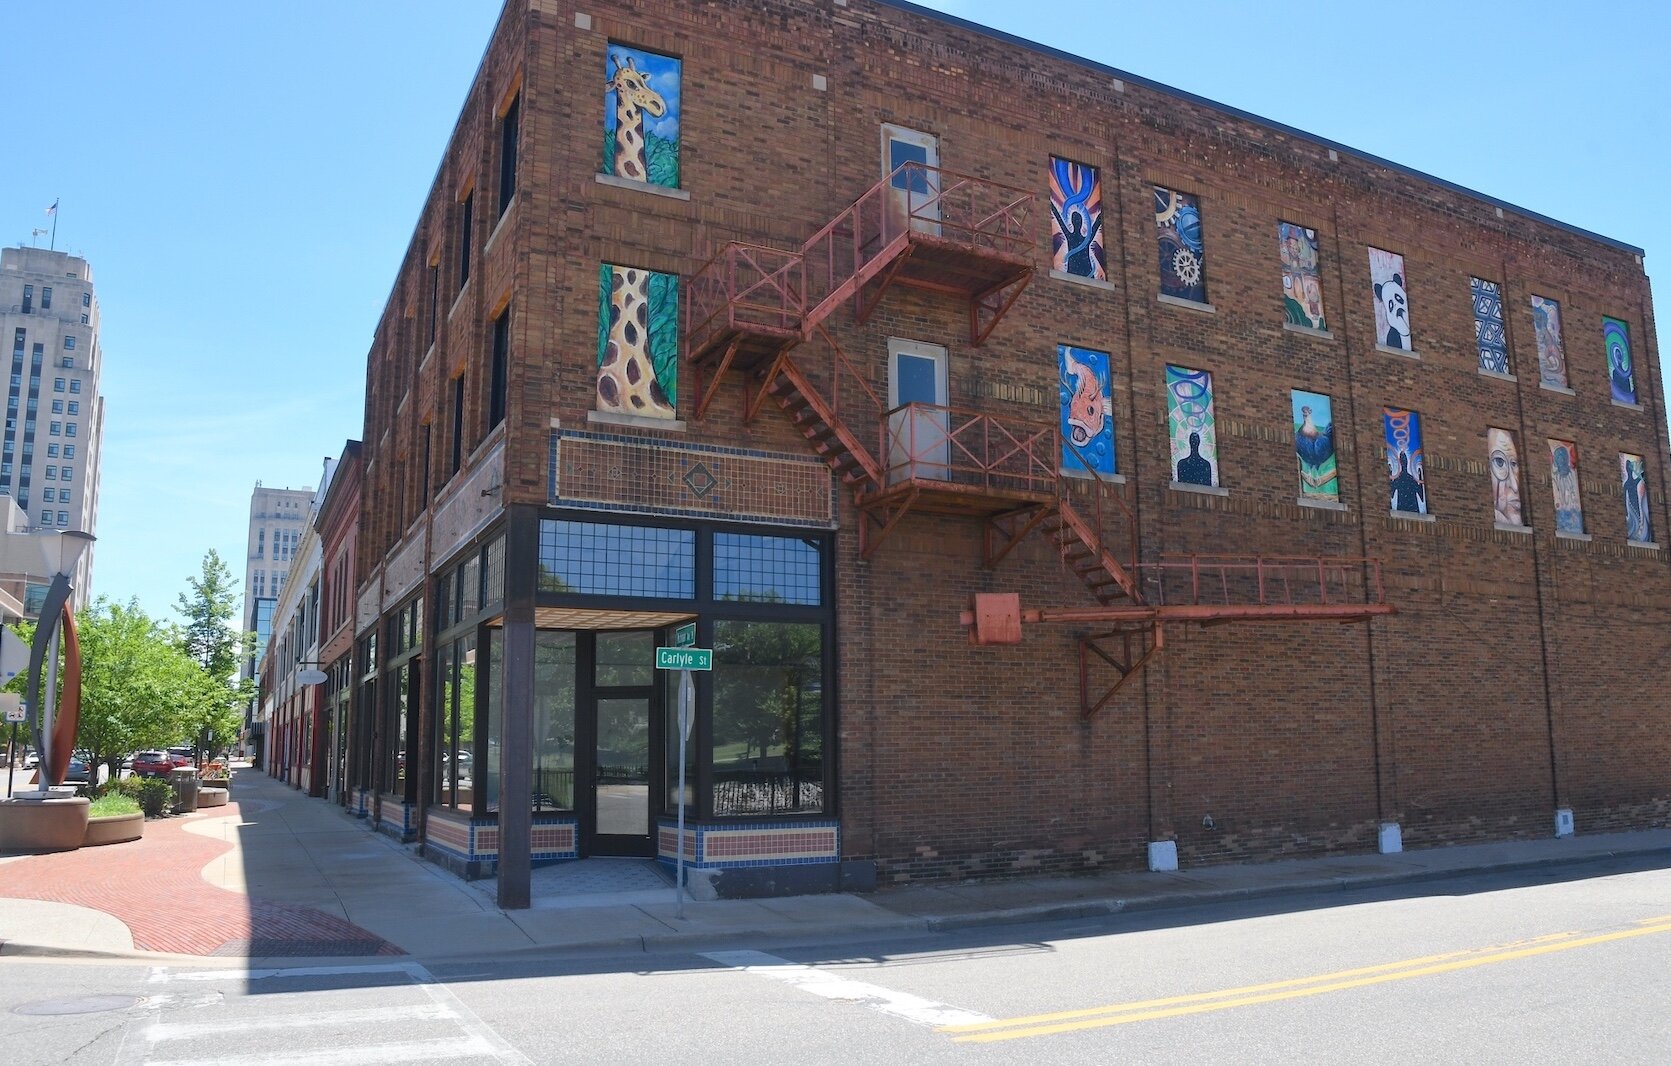 The future location of a local food Co-op is in downtown Battle Creek.